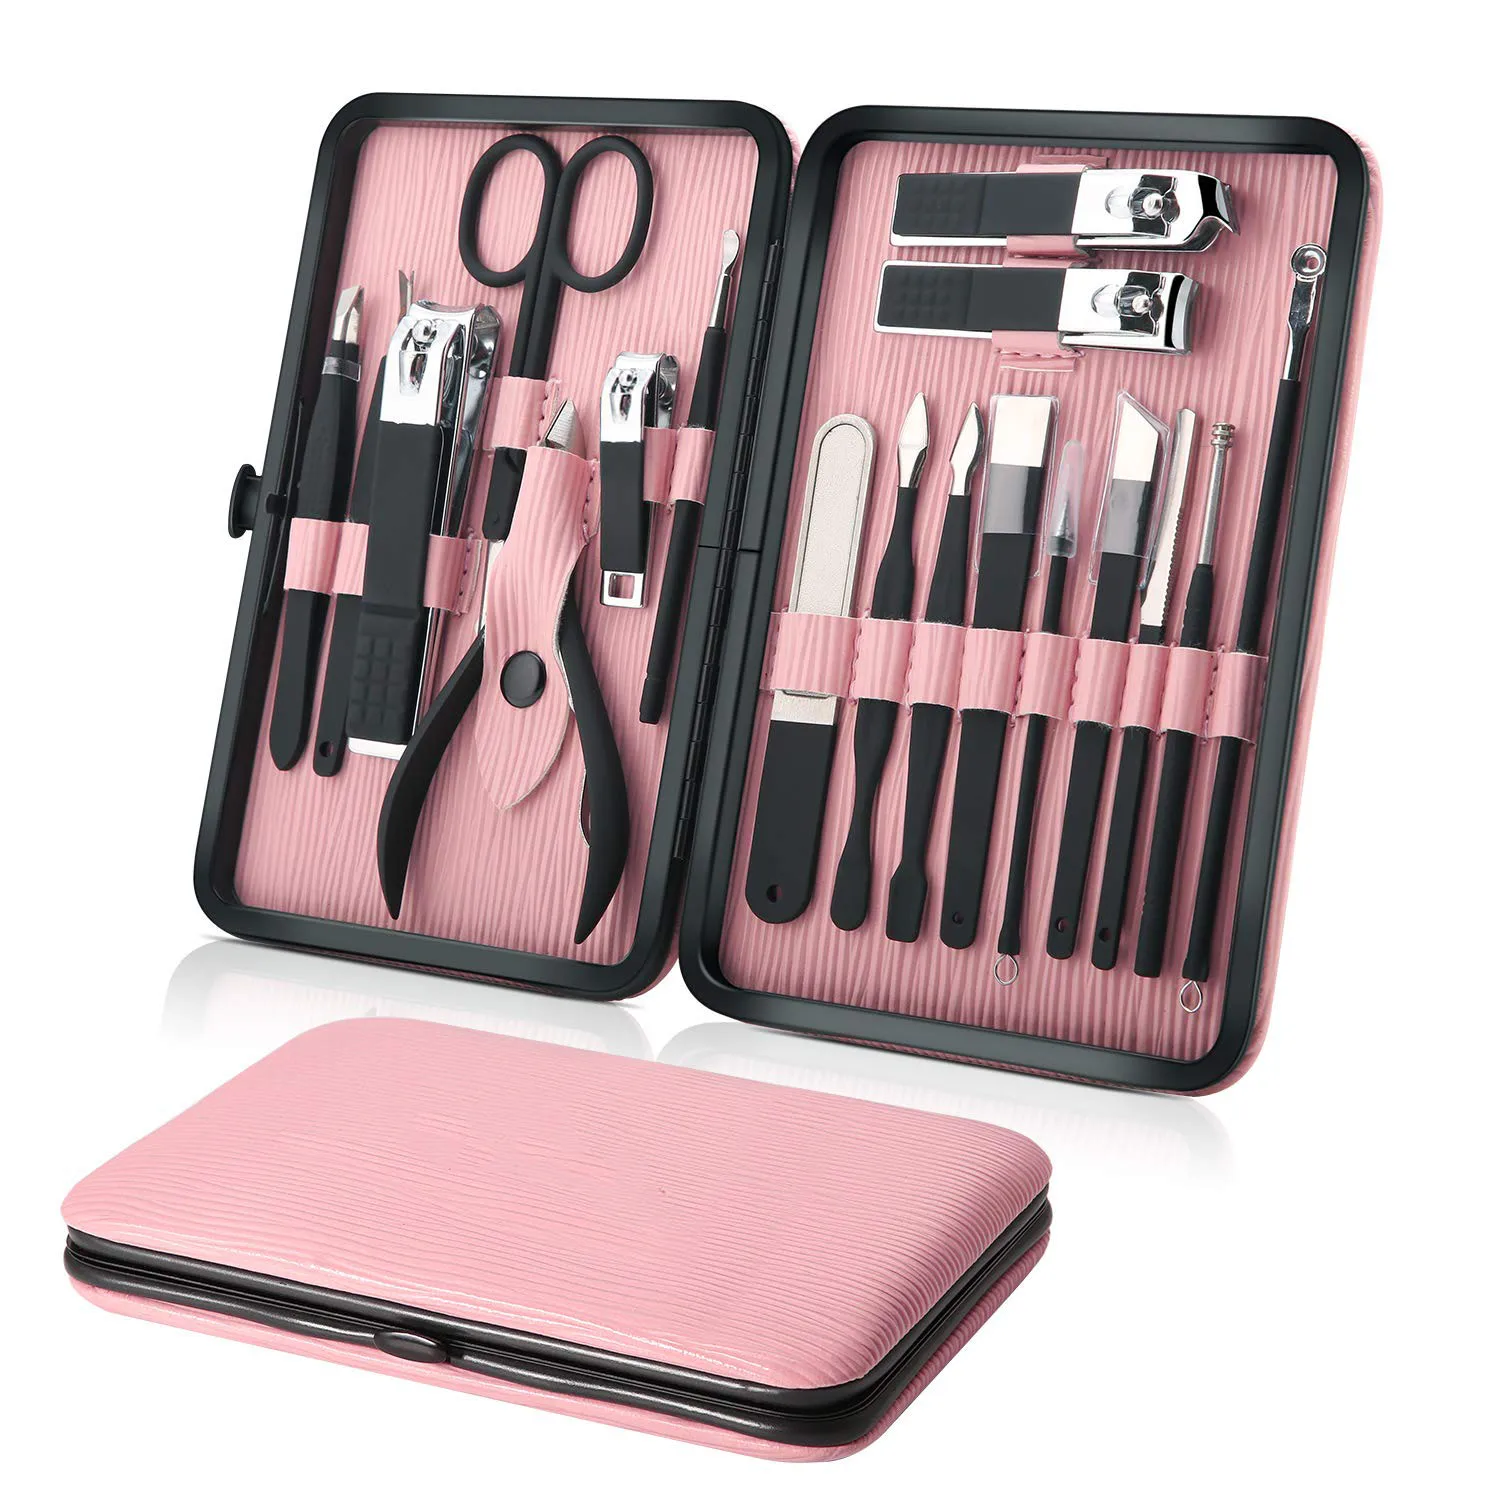 Manicure Set Professional Nail Clippers Kit Pedicure Care Tools- Stainle... - $23.38